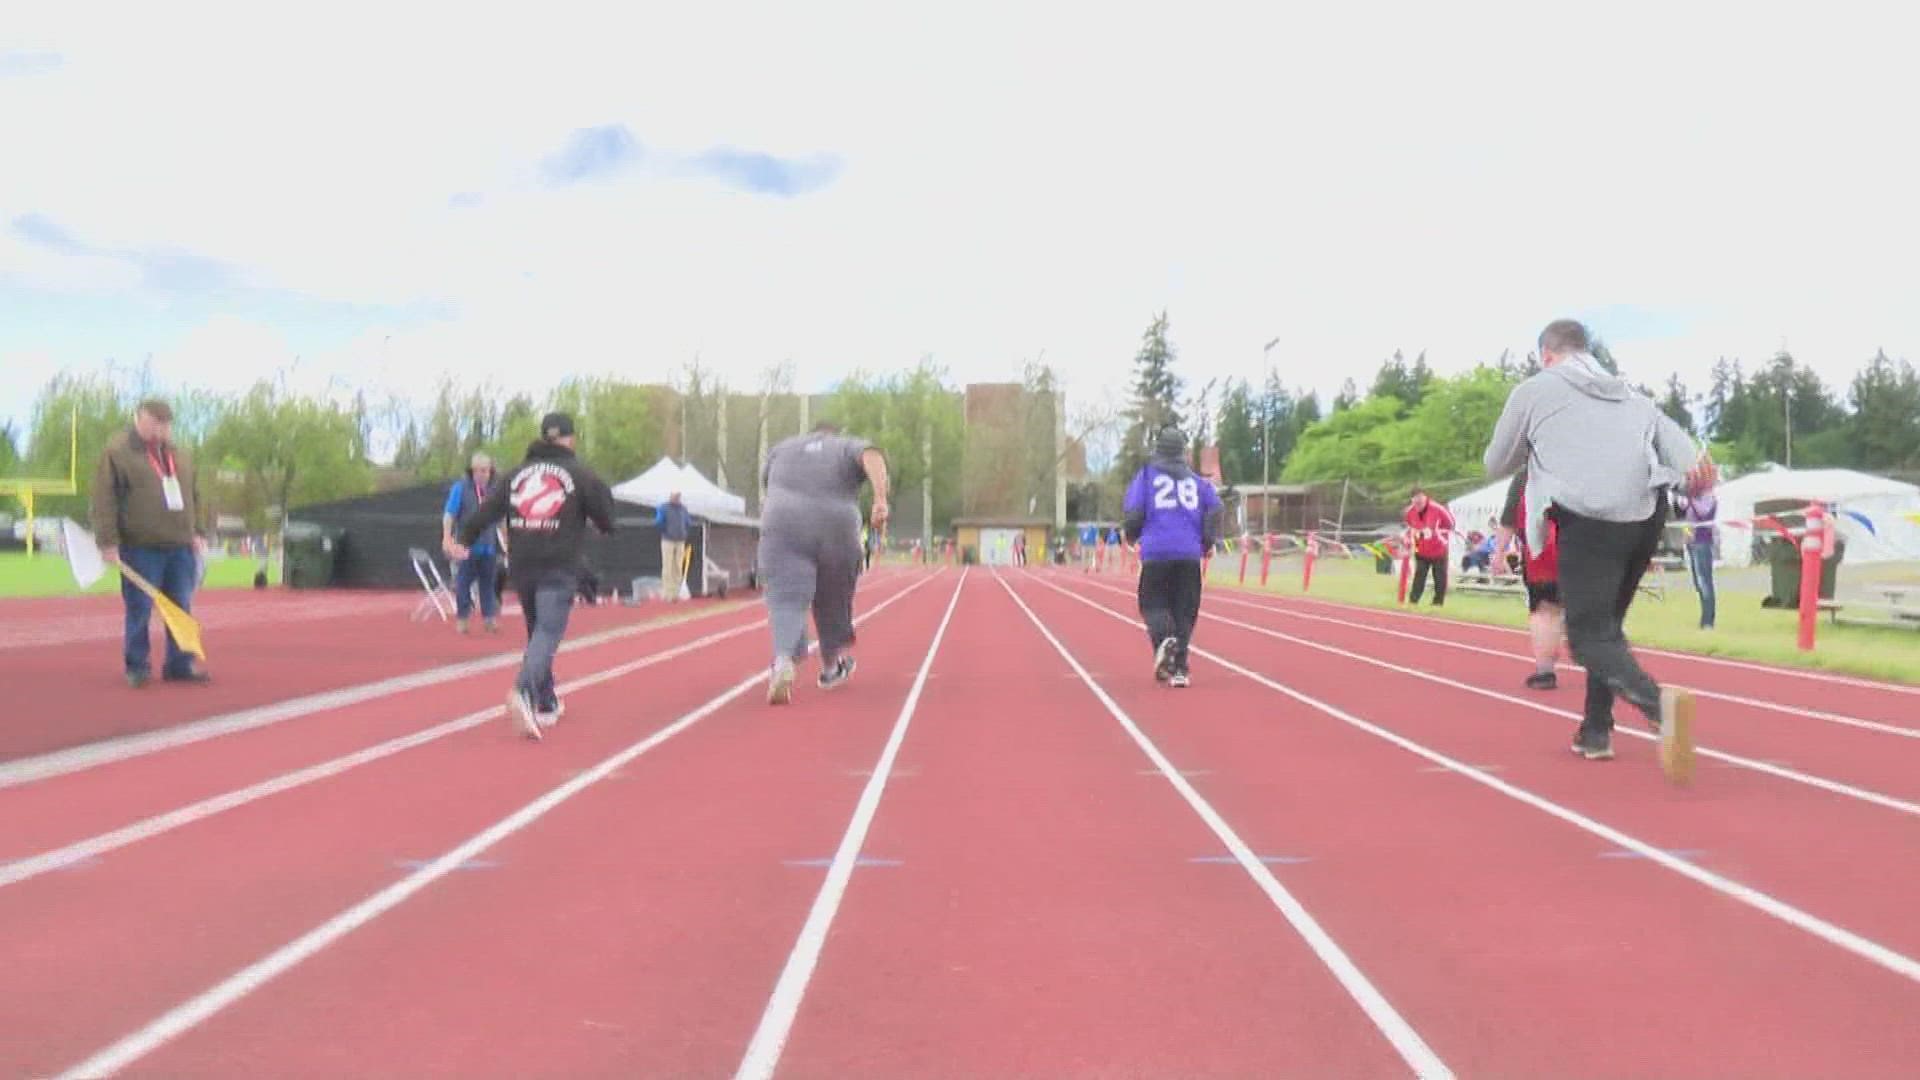 Athletes living with intellectual disabilities competed all weekend long on the Pacific Lutheran University campus in Tacoma.